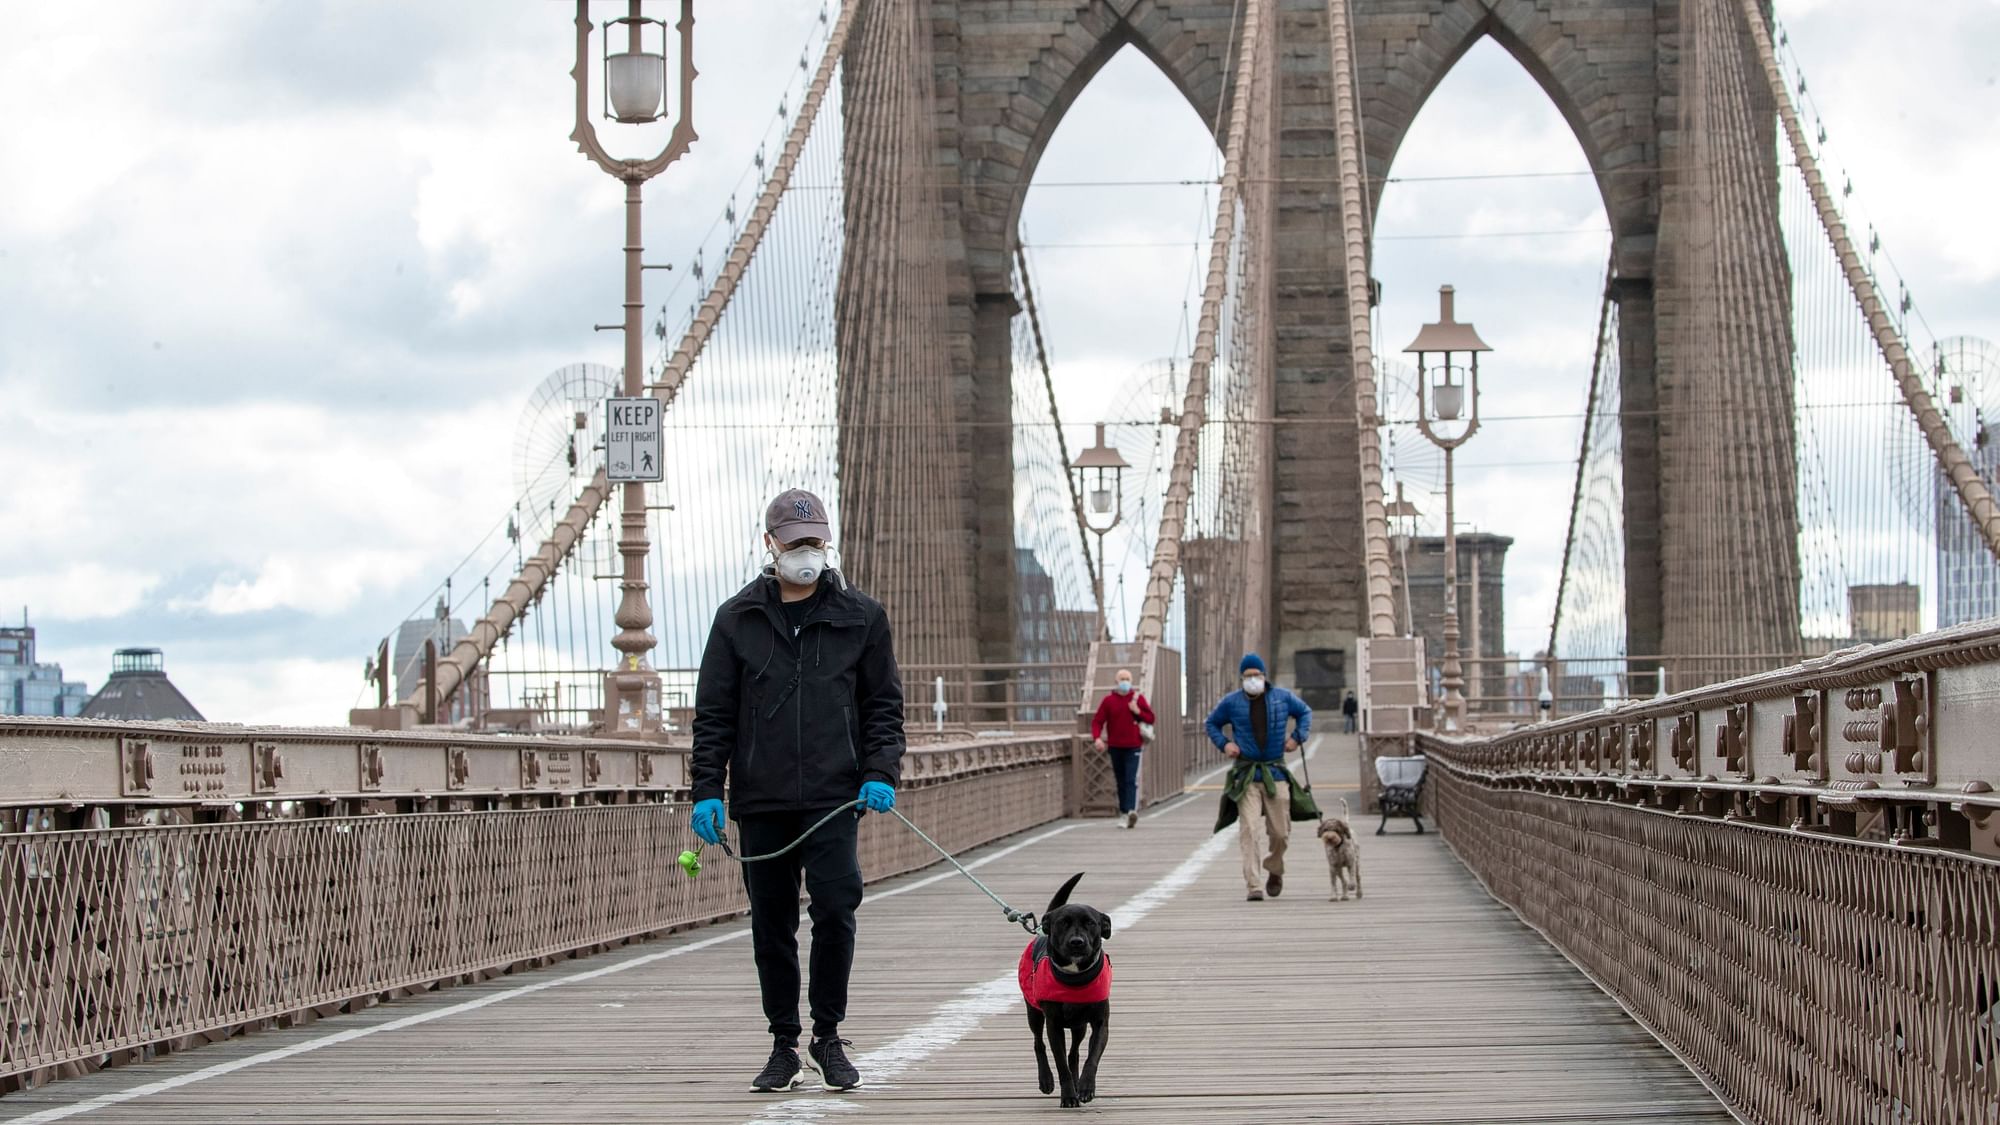 People wear facial masks for protection against the coronavirus as they walk their dogs on the Brooklyn Bridge, Friday, 10 April 2020, in New York.